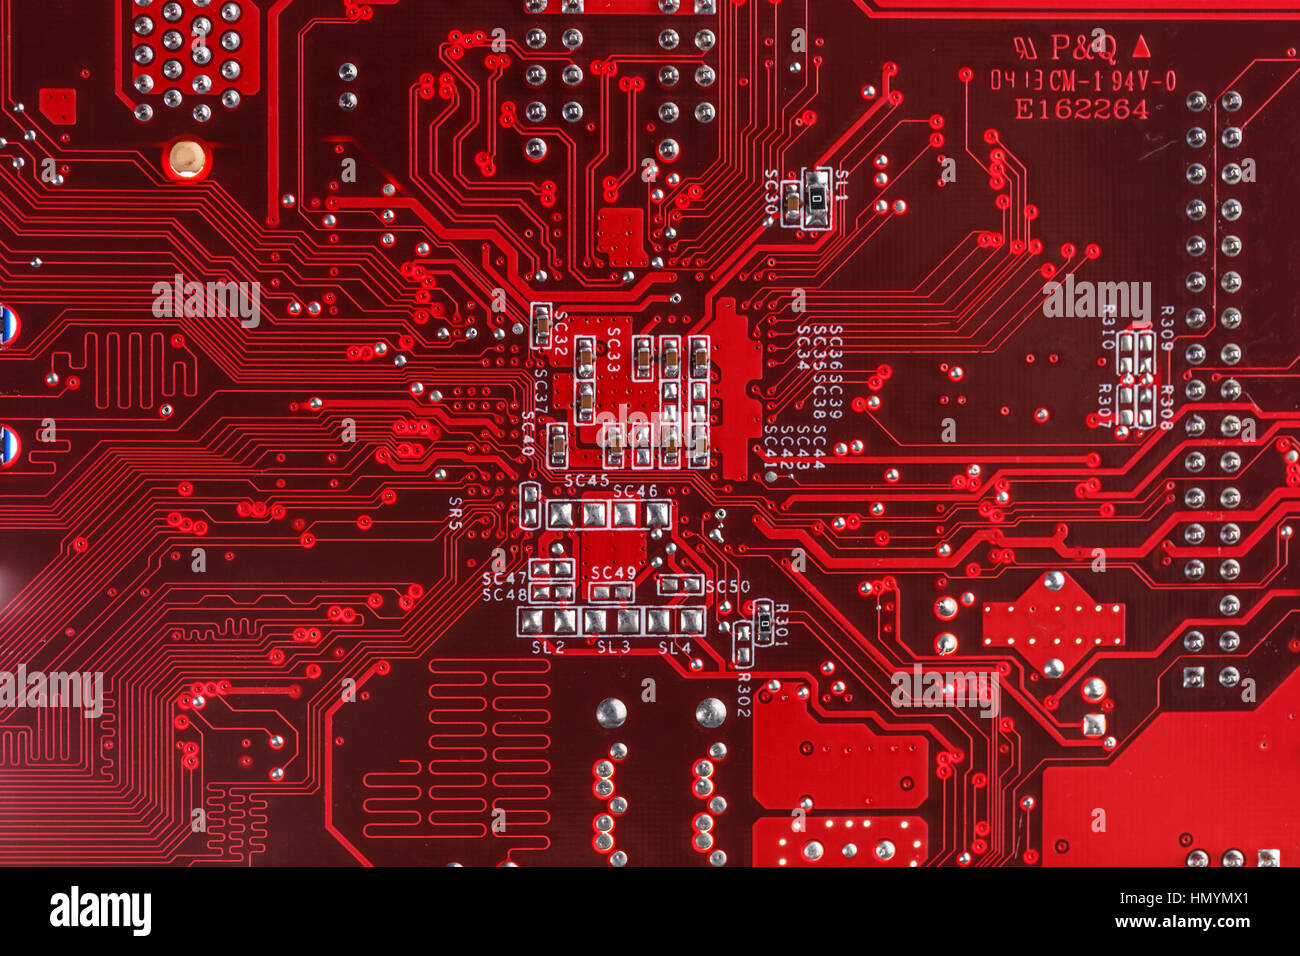 Red circuit board background of computer motherboard Stock Photo - Alamy